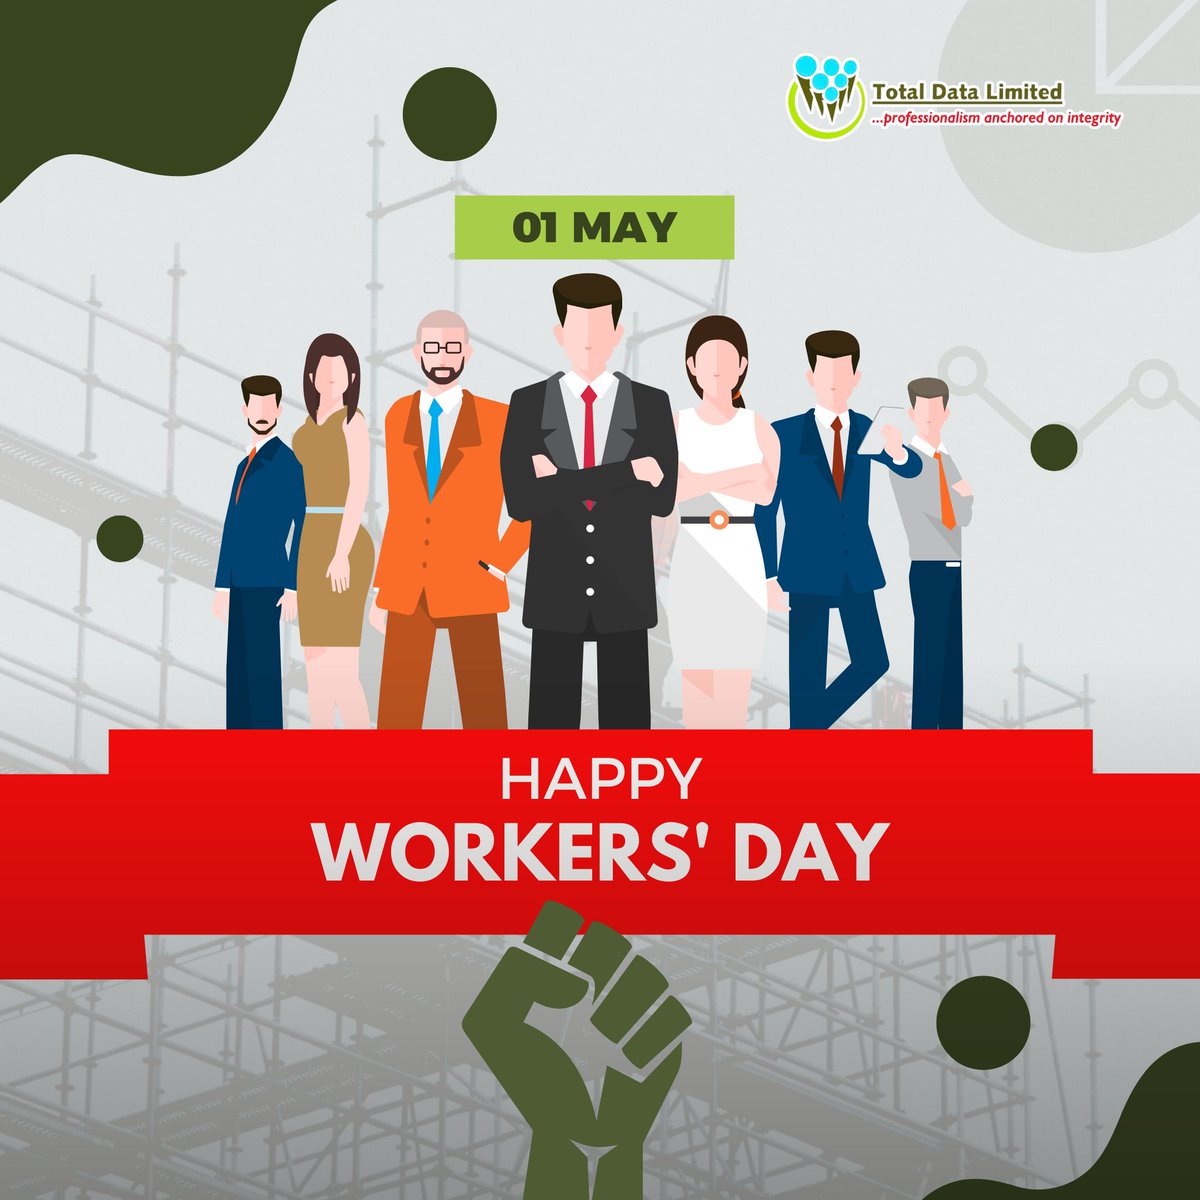 Happy Workers Day to all Workers. 💼

#labourday #workersday #InternationalWorkersDay 
#totaldatalimited #TDL360 #OURTDL 
#Outsourcing #HRServices